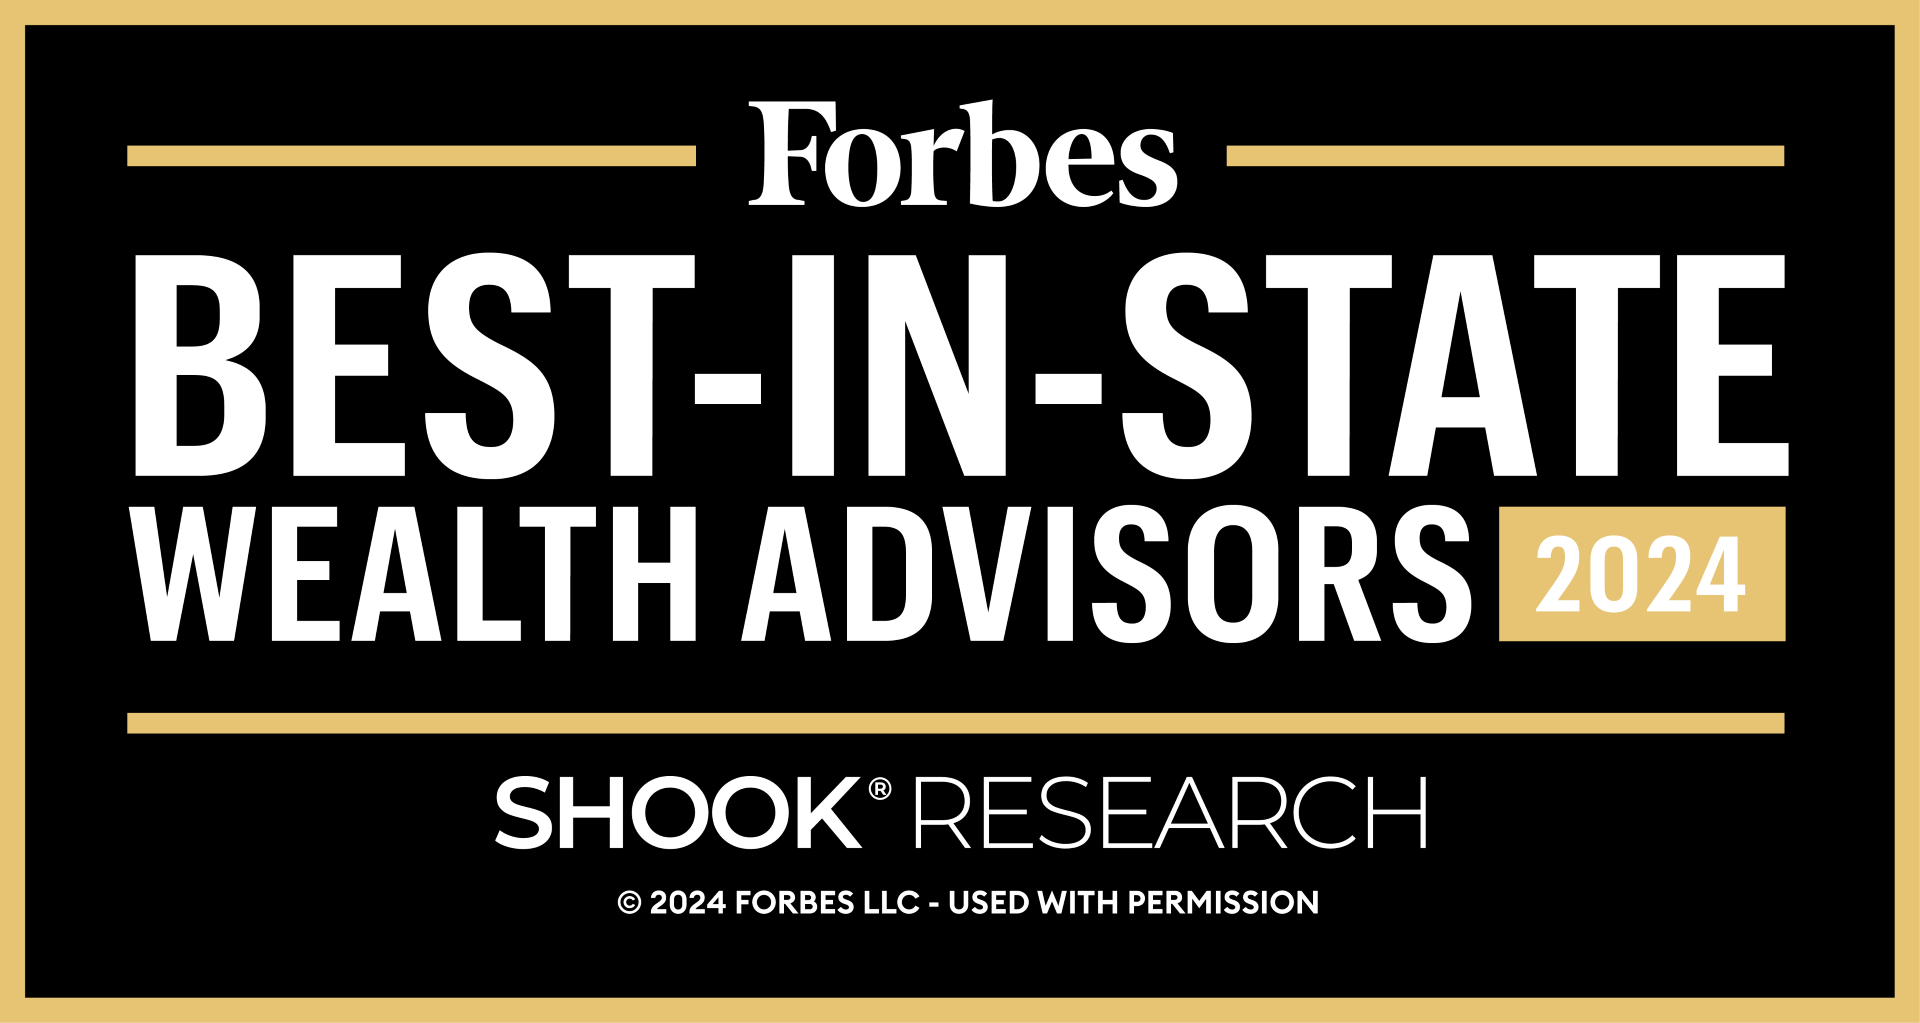 Mark Winthrop Recognized as Forbes Best-In-State Wealth Advisor